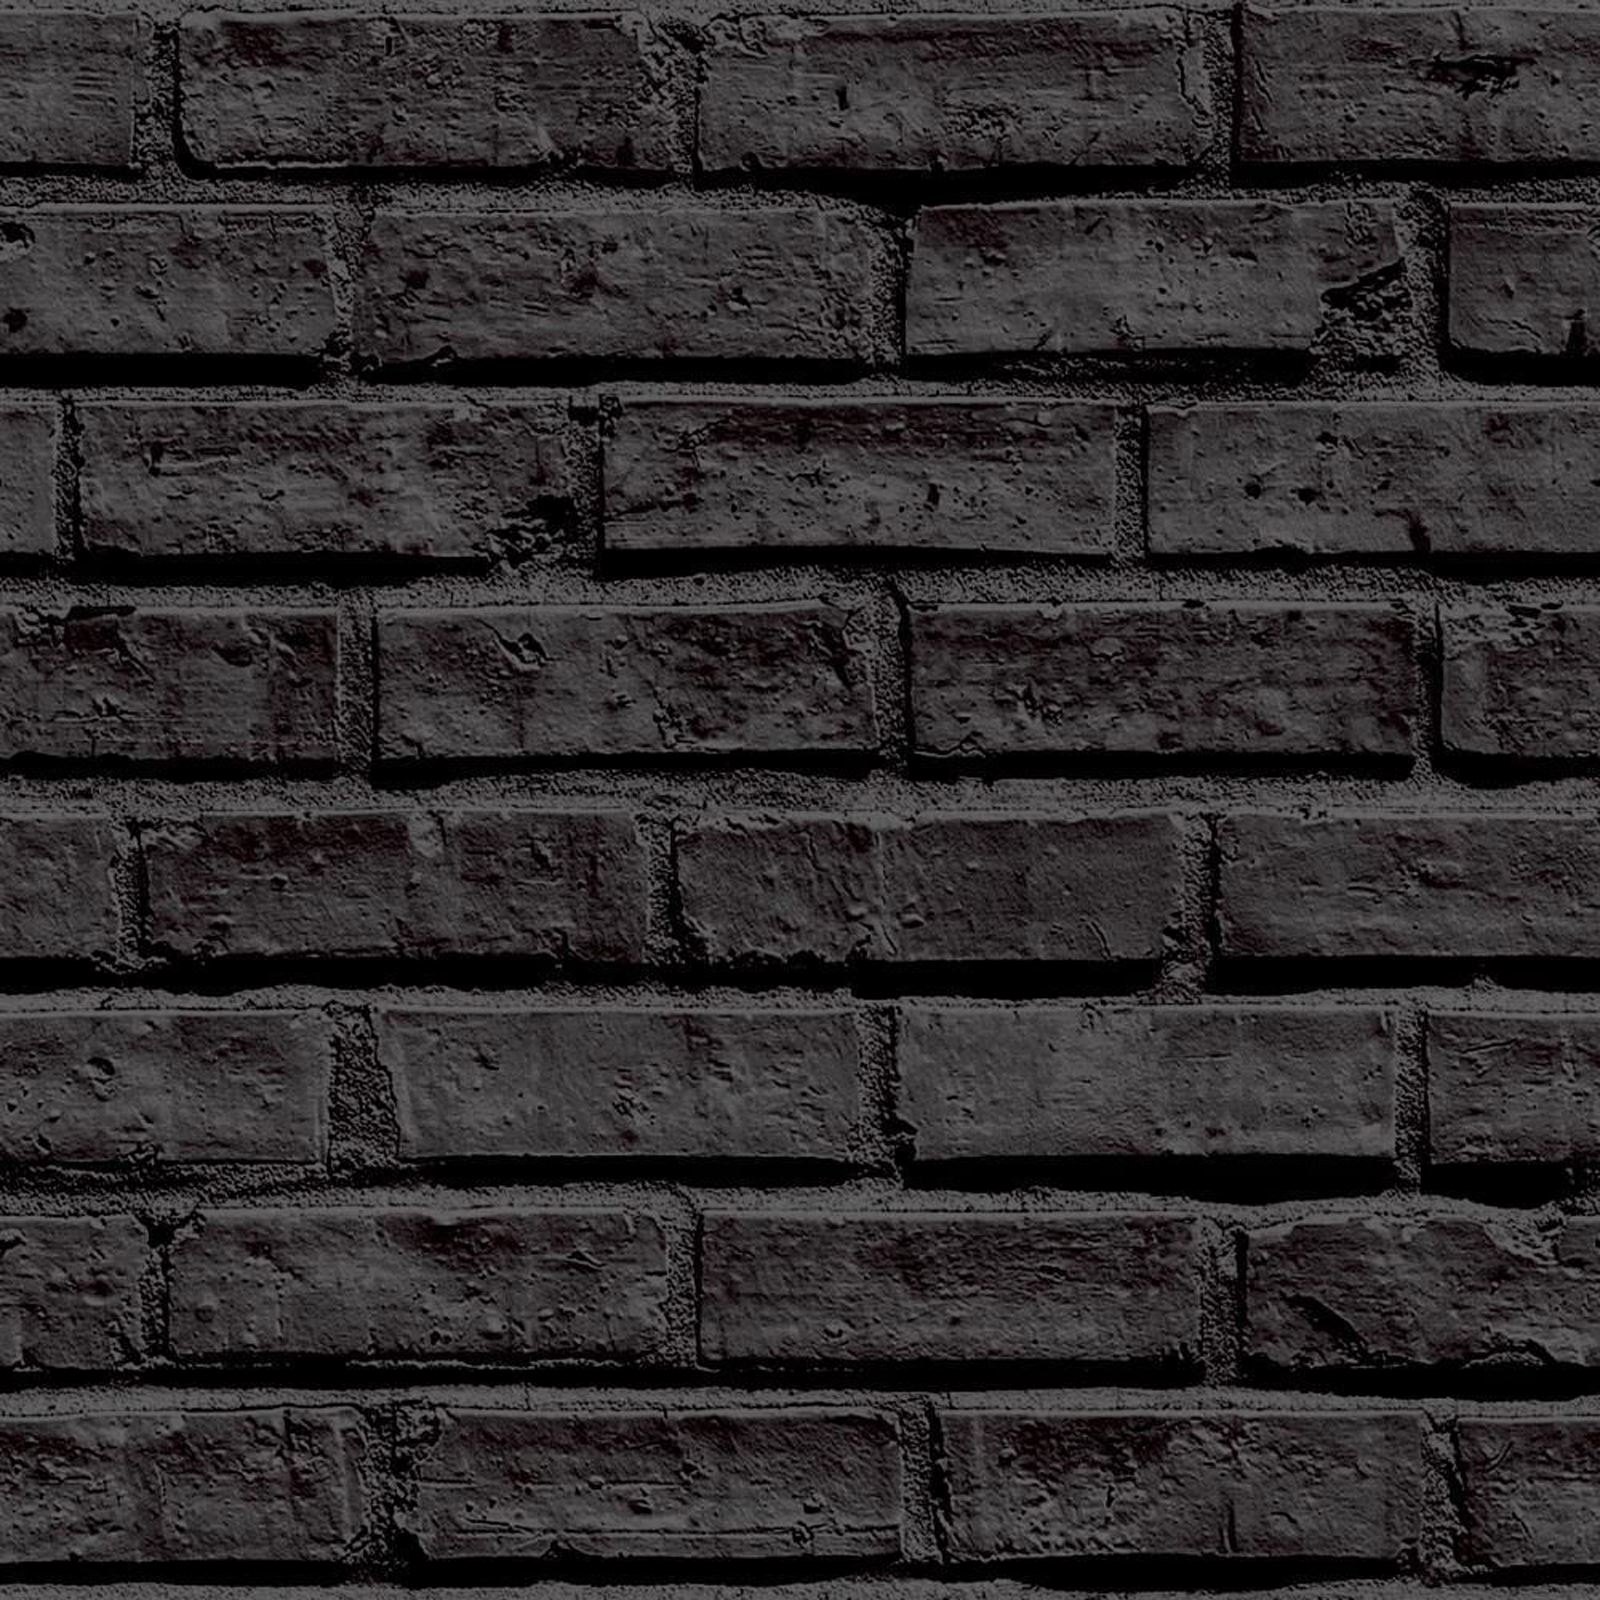 Details About Black Brick Wallpaper Arthouse Vip New